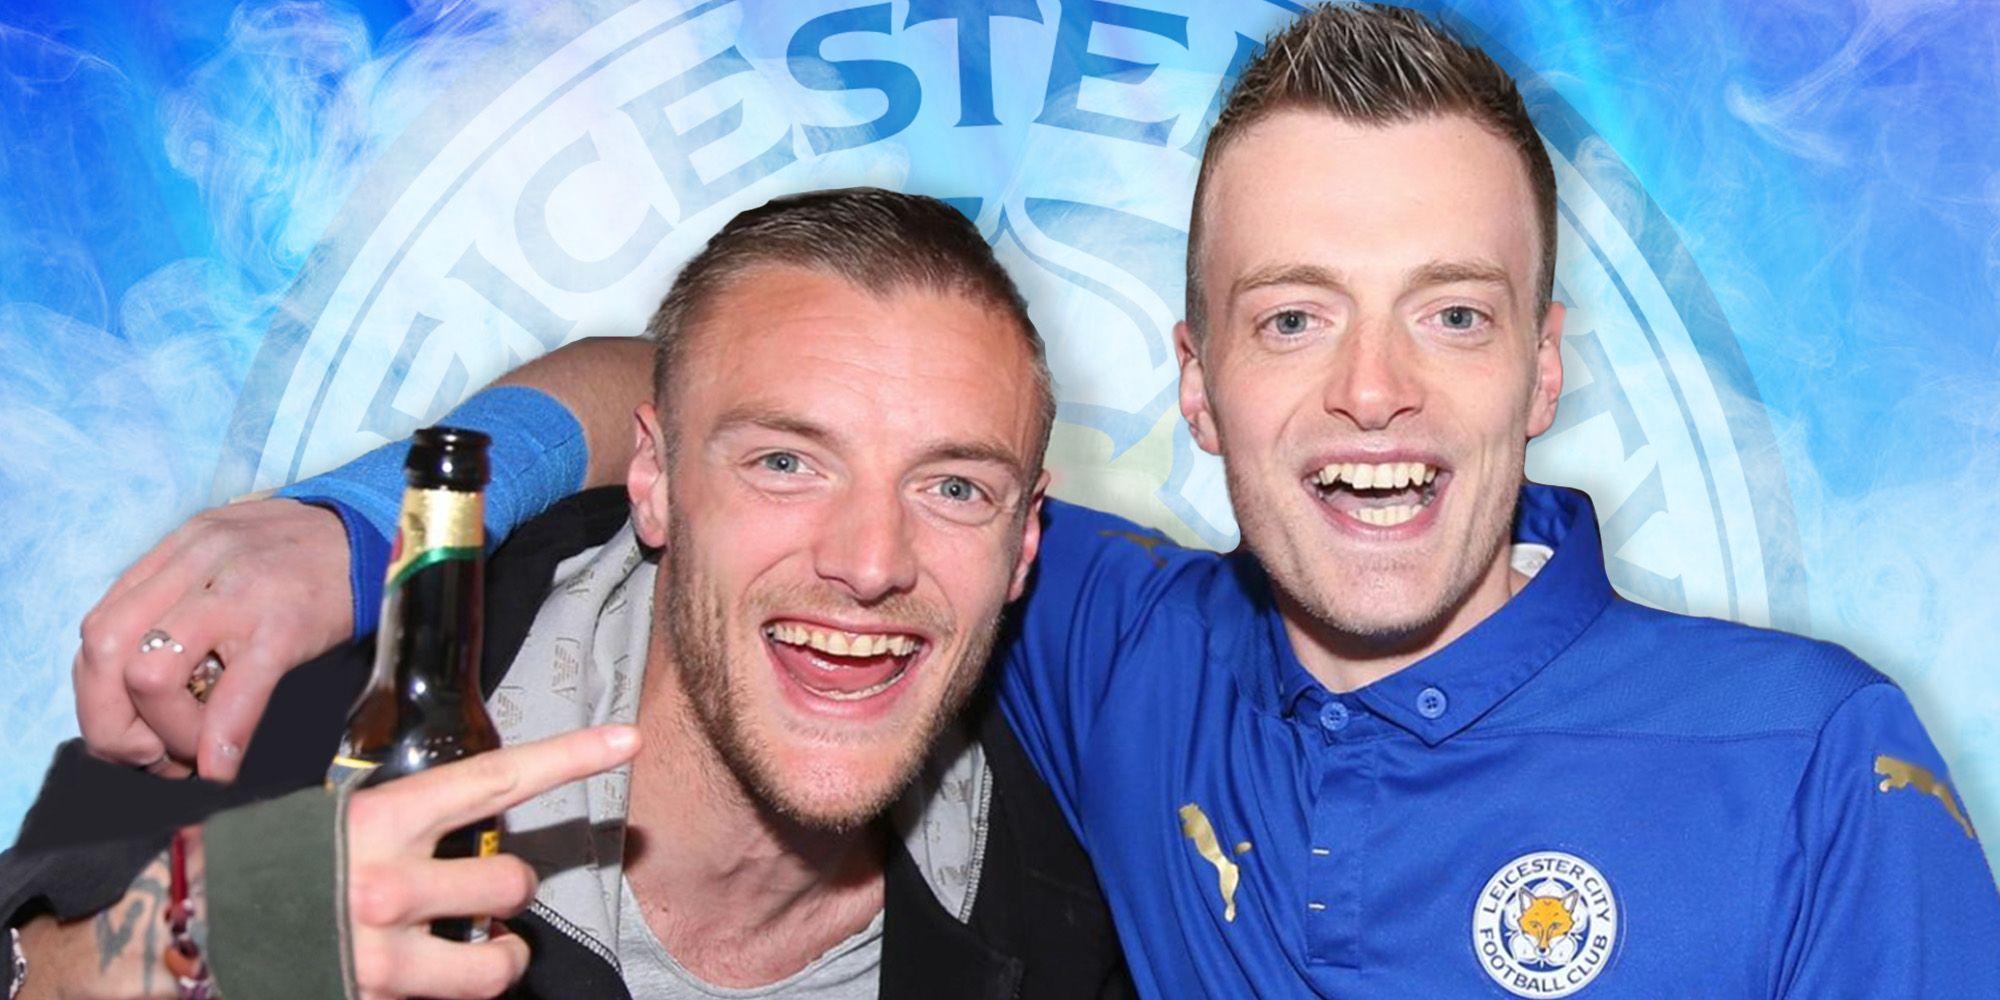 What happened to the Leicester City fan who was Jamie Vardy's lookalike